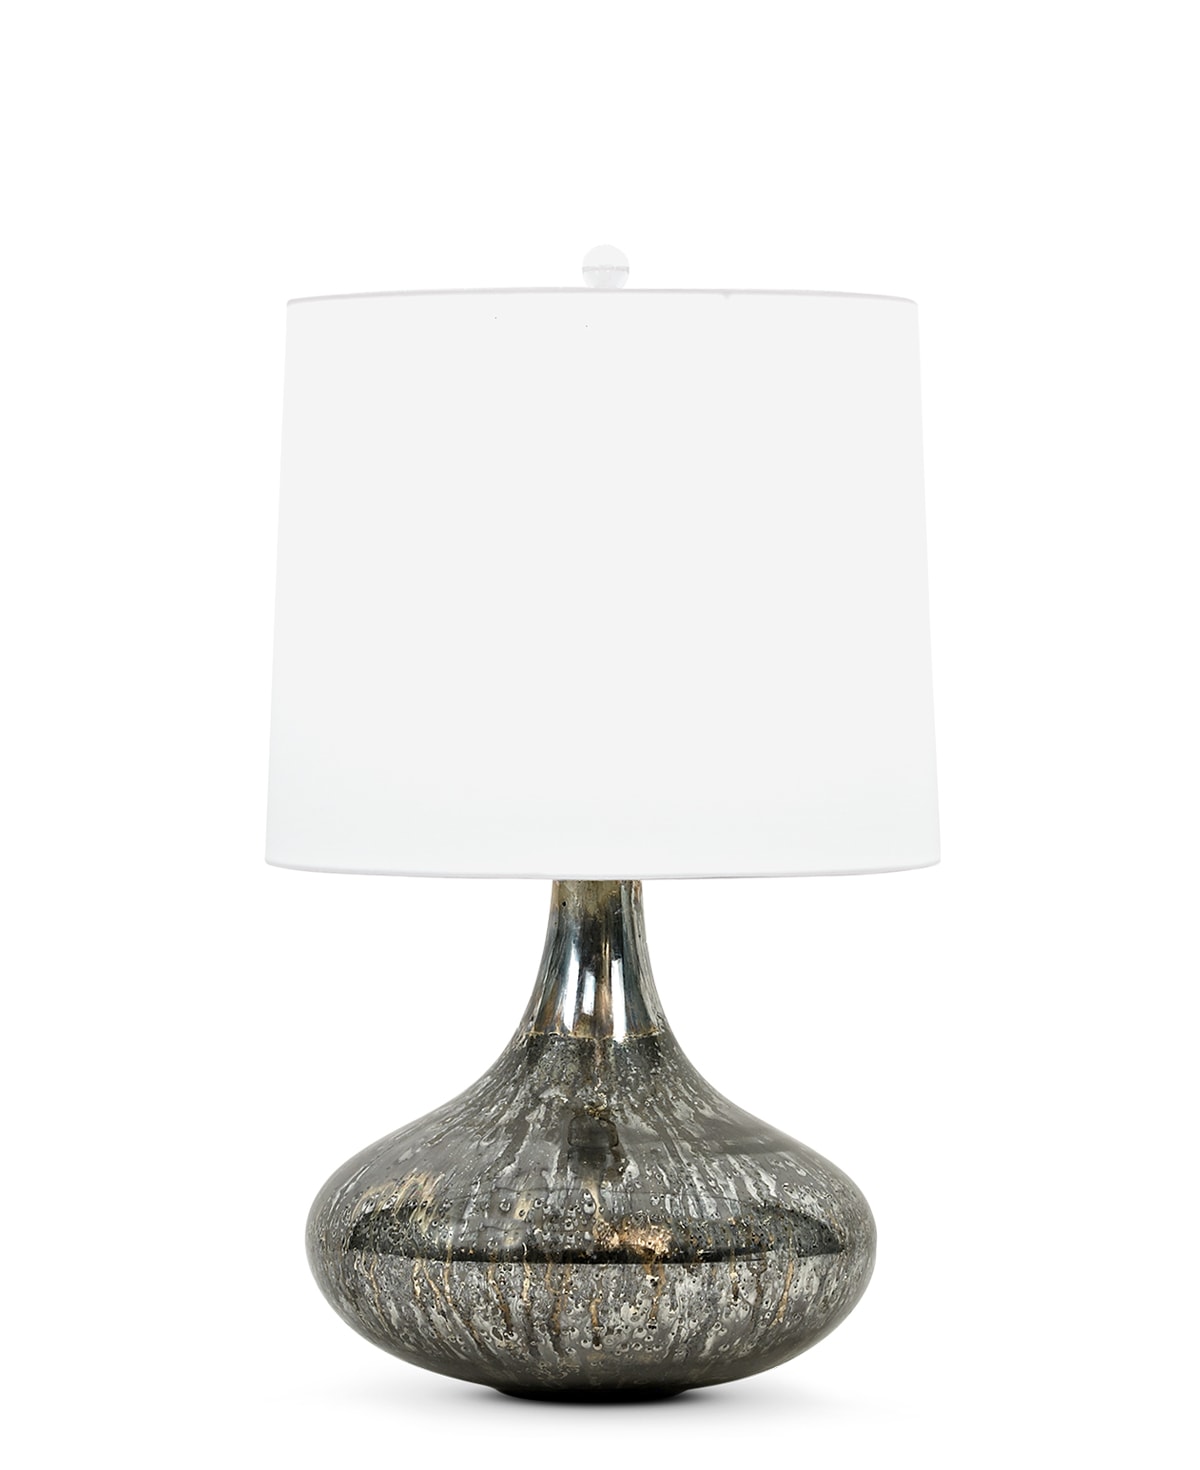 FlowDecor Miles Table Lamp in mouth-blown glass with dark mixed finish and off-white cotton tapered drum shade (# 3805)